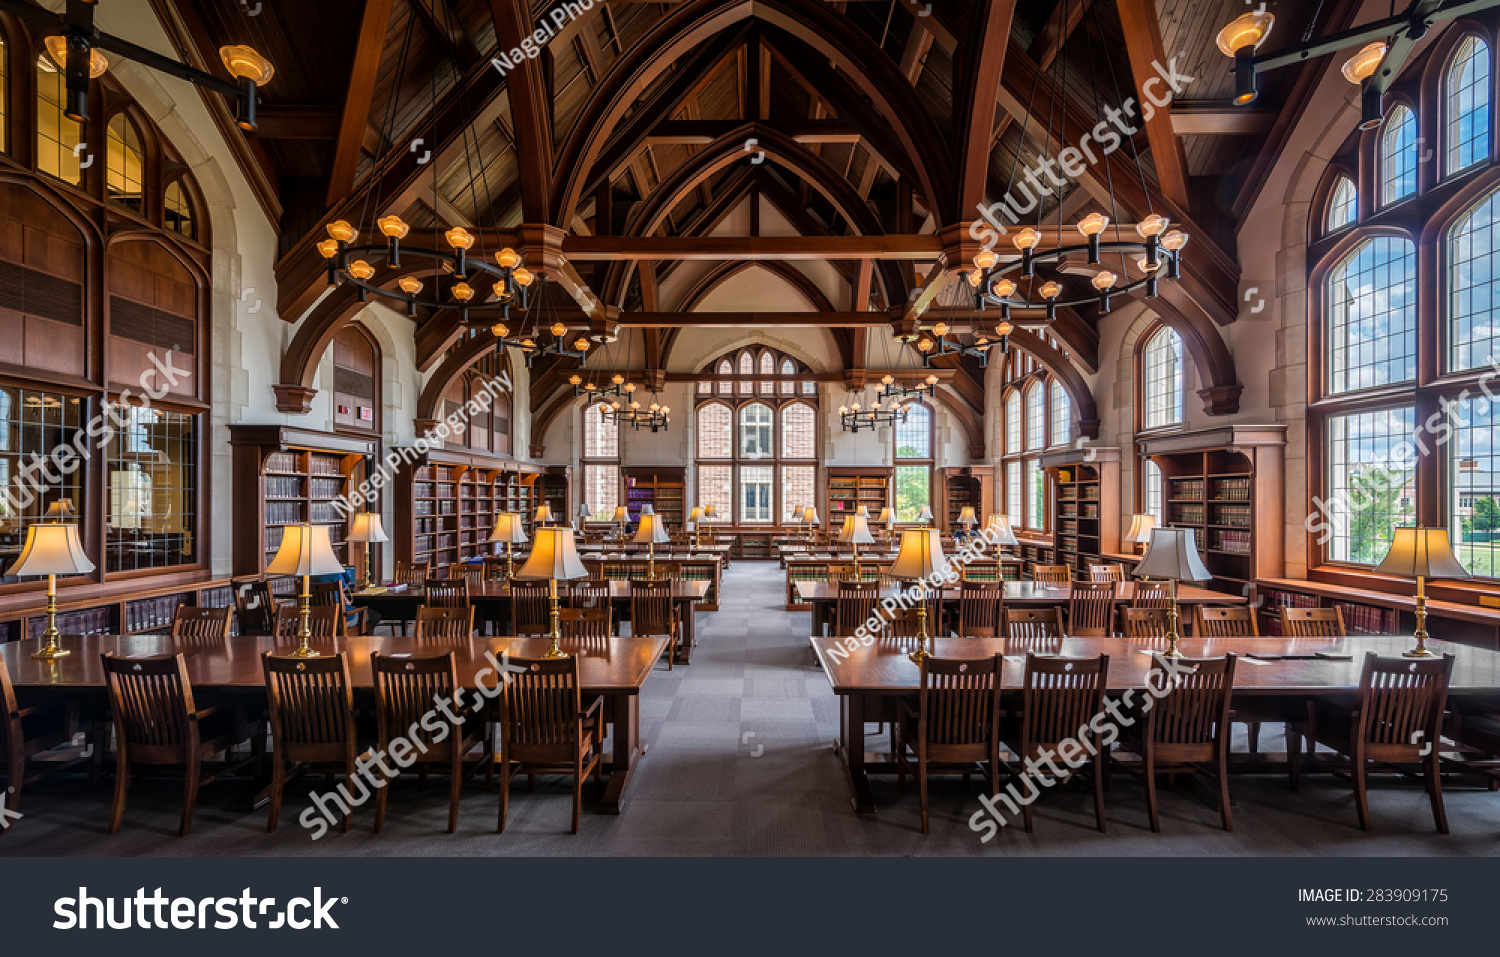 St. Louis, Missouri - May 28: Law Library On The Campus Of Washington University On May 28, 2015 ...